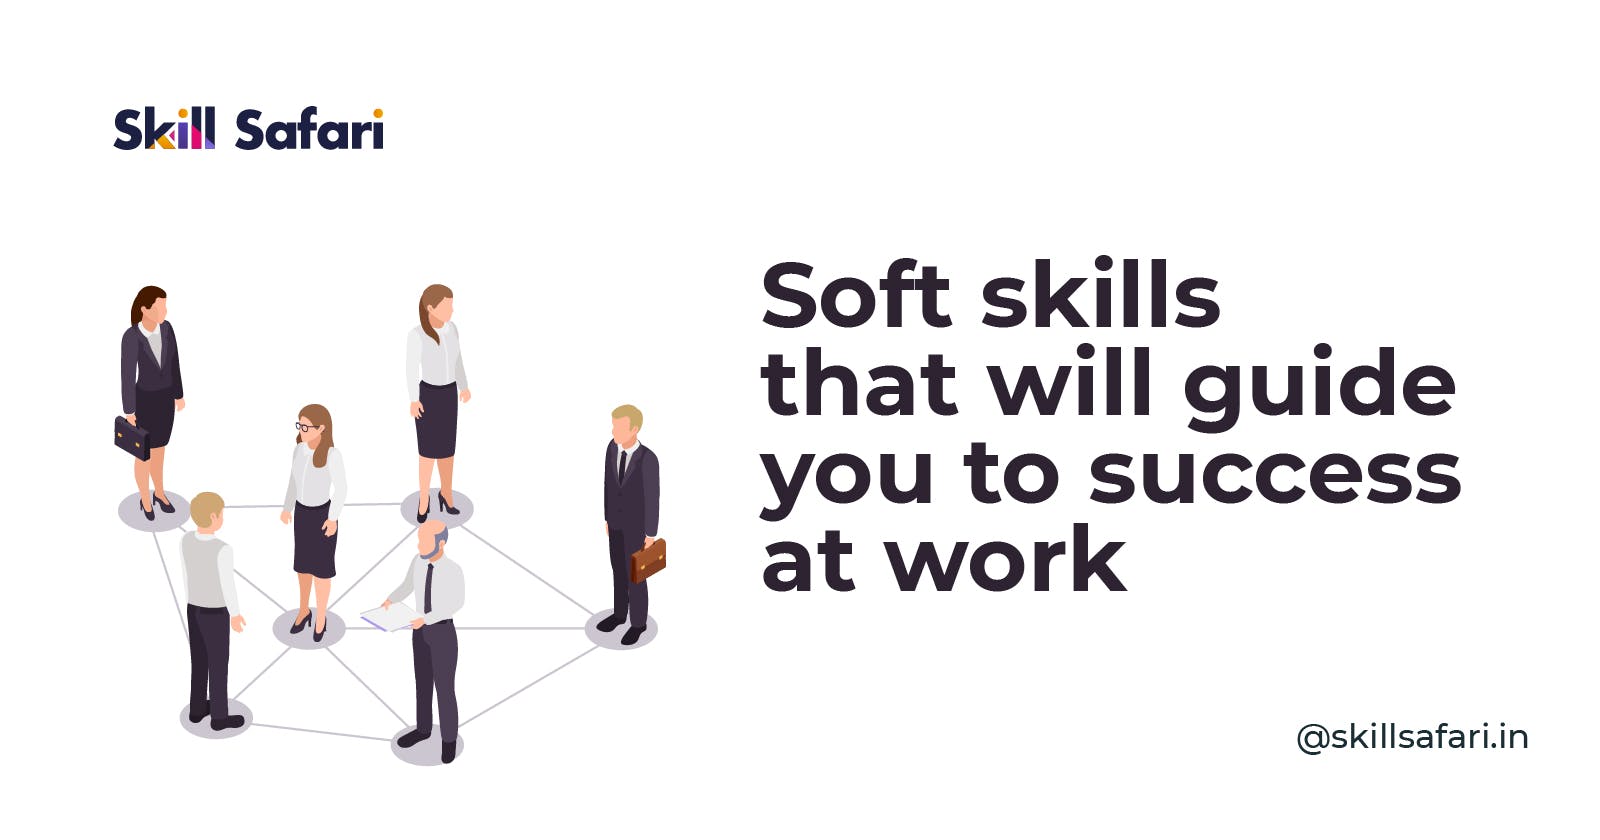 Soft skills that will guide you to success at work